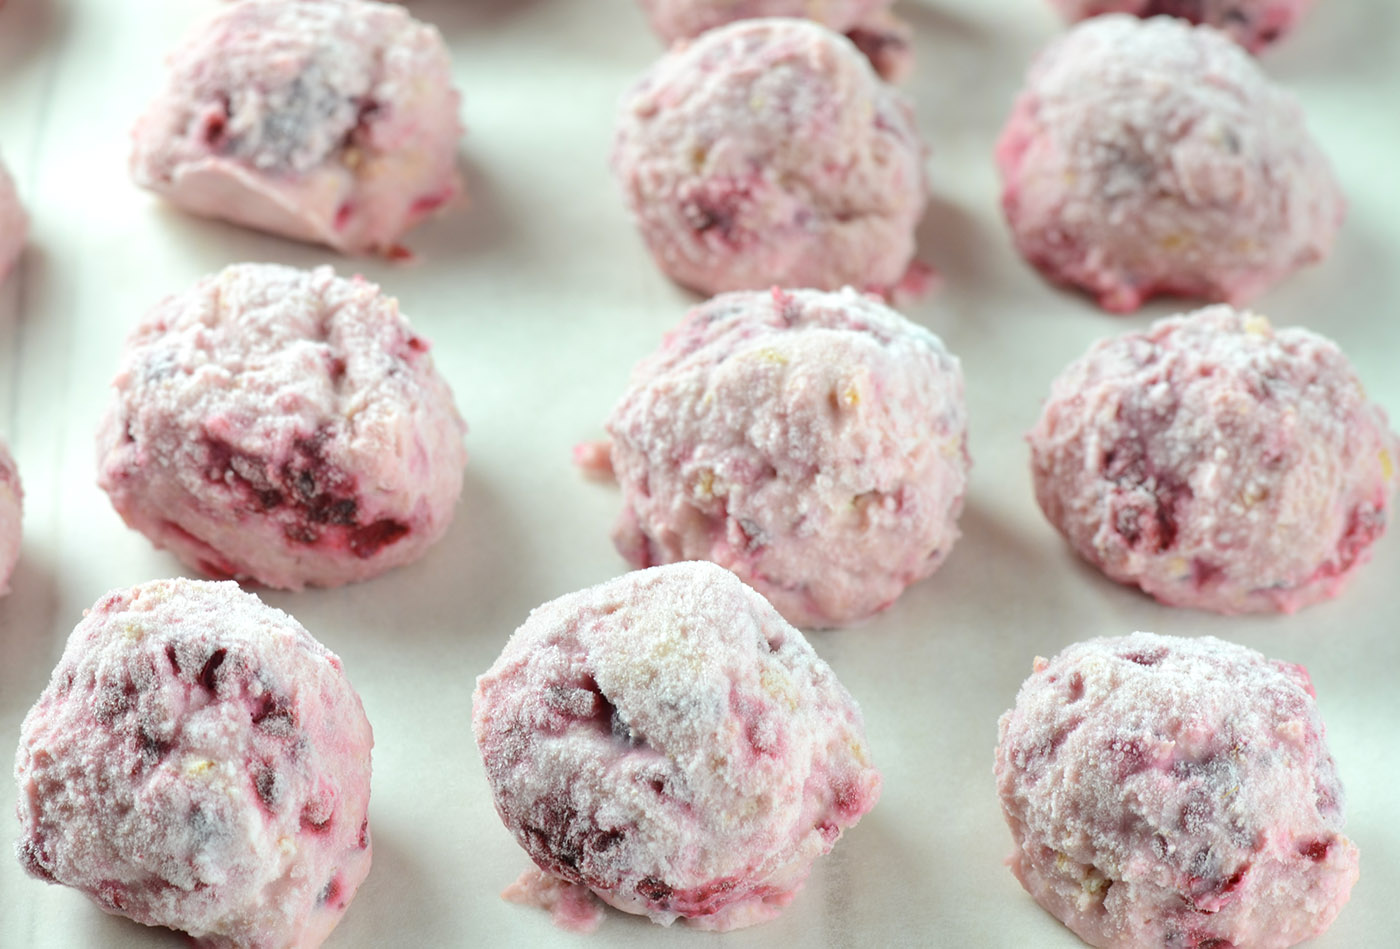 Powdery pink raspberry-flavored sugar-coated truffle balls laid out on parchment paper, in the process of chilling or setting.